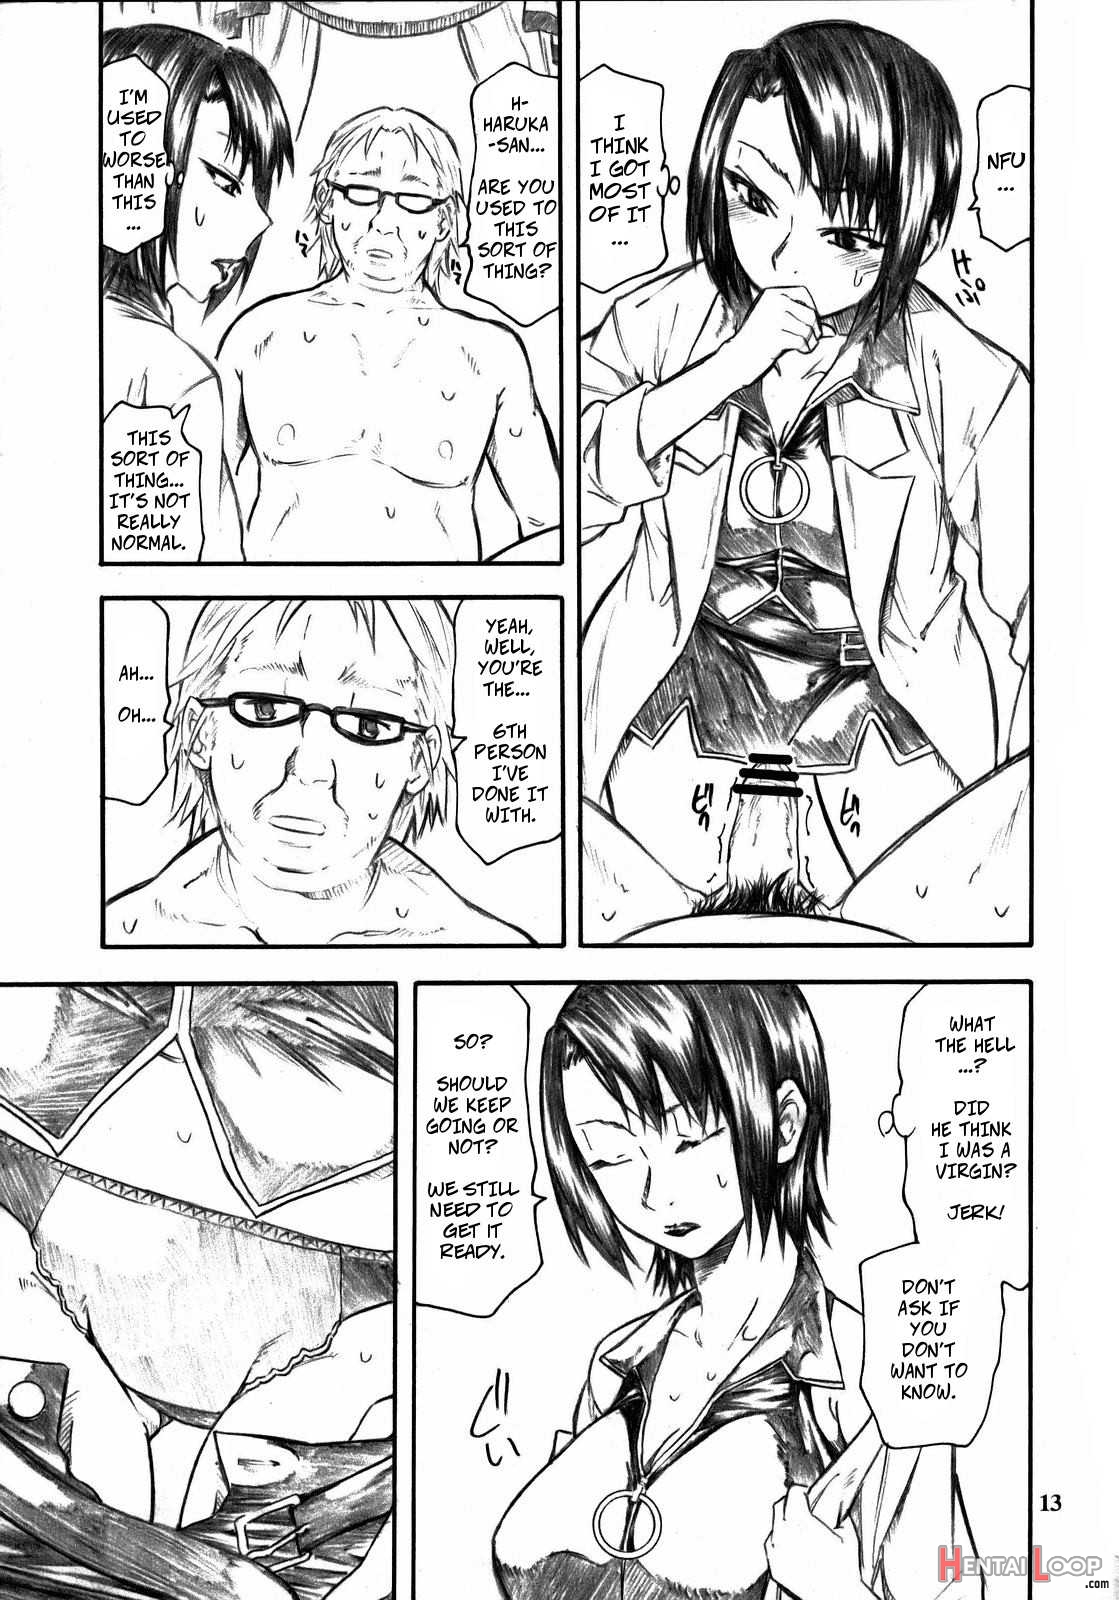 Harukasan Is Fed Up. page 12